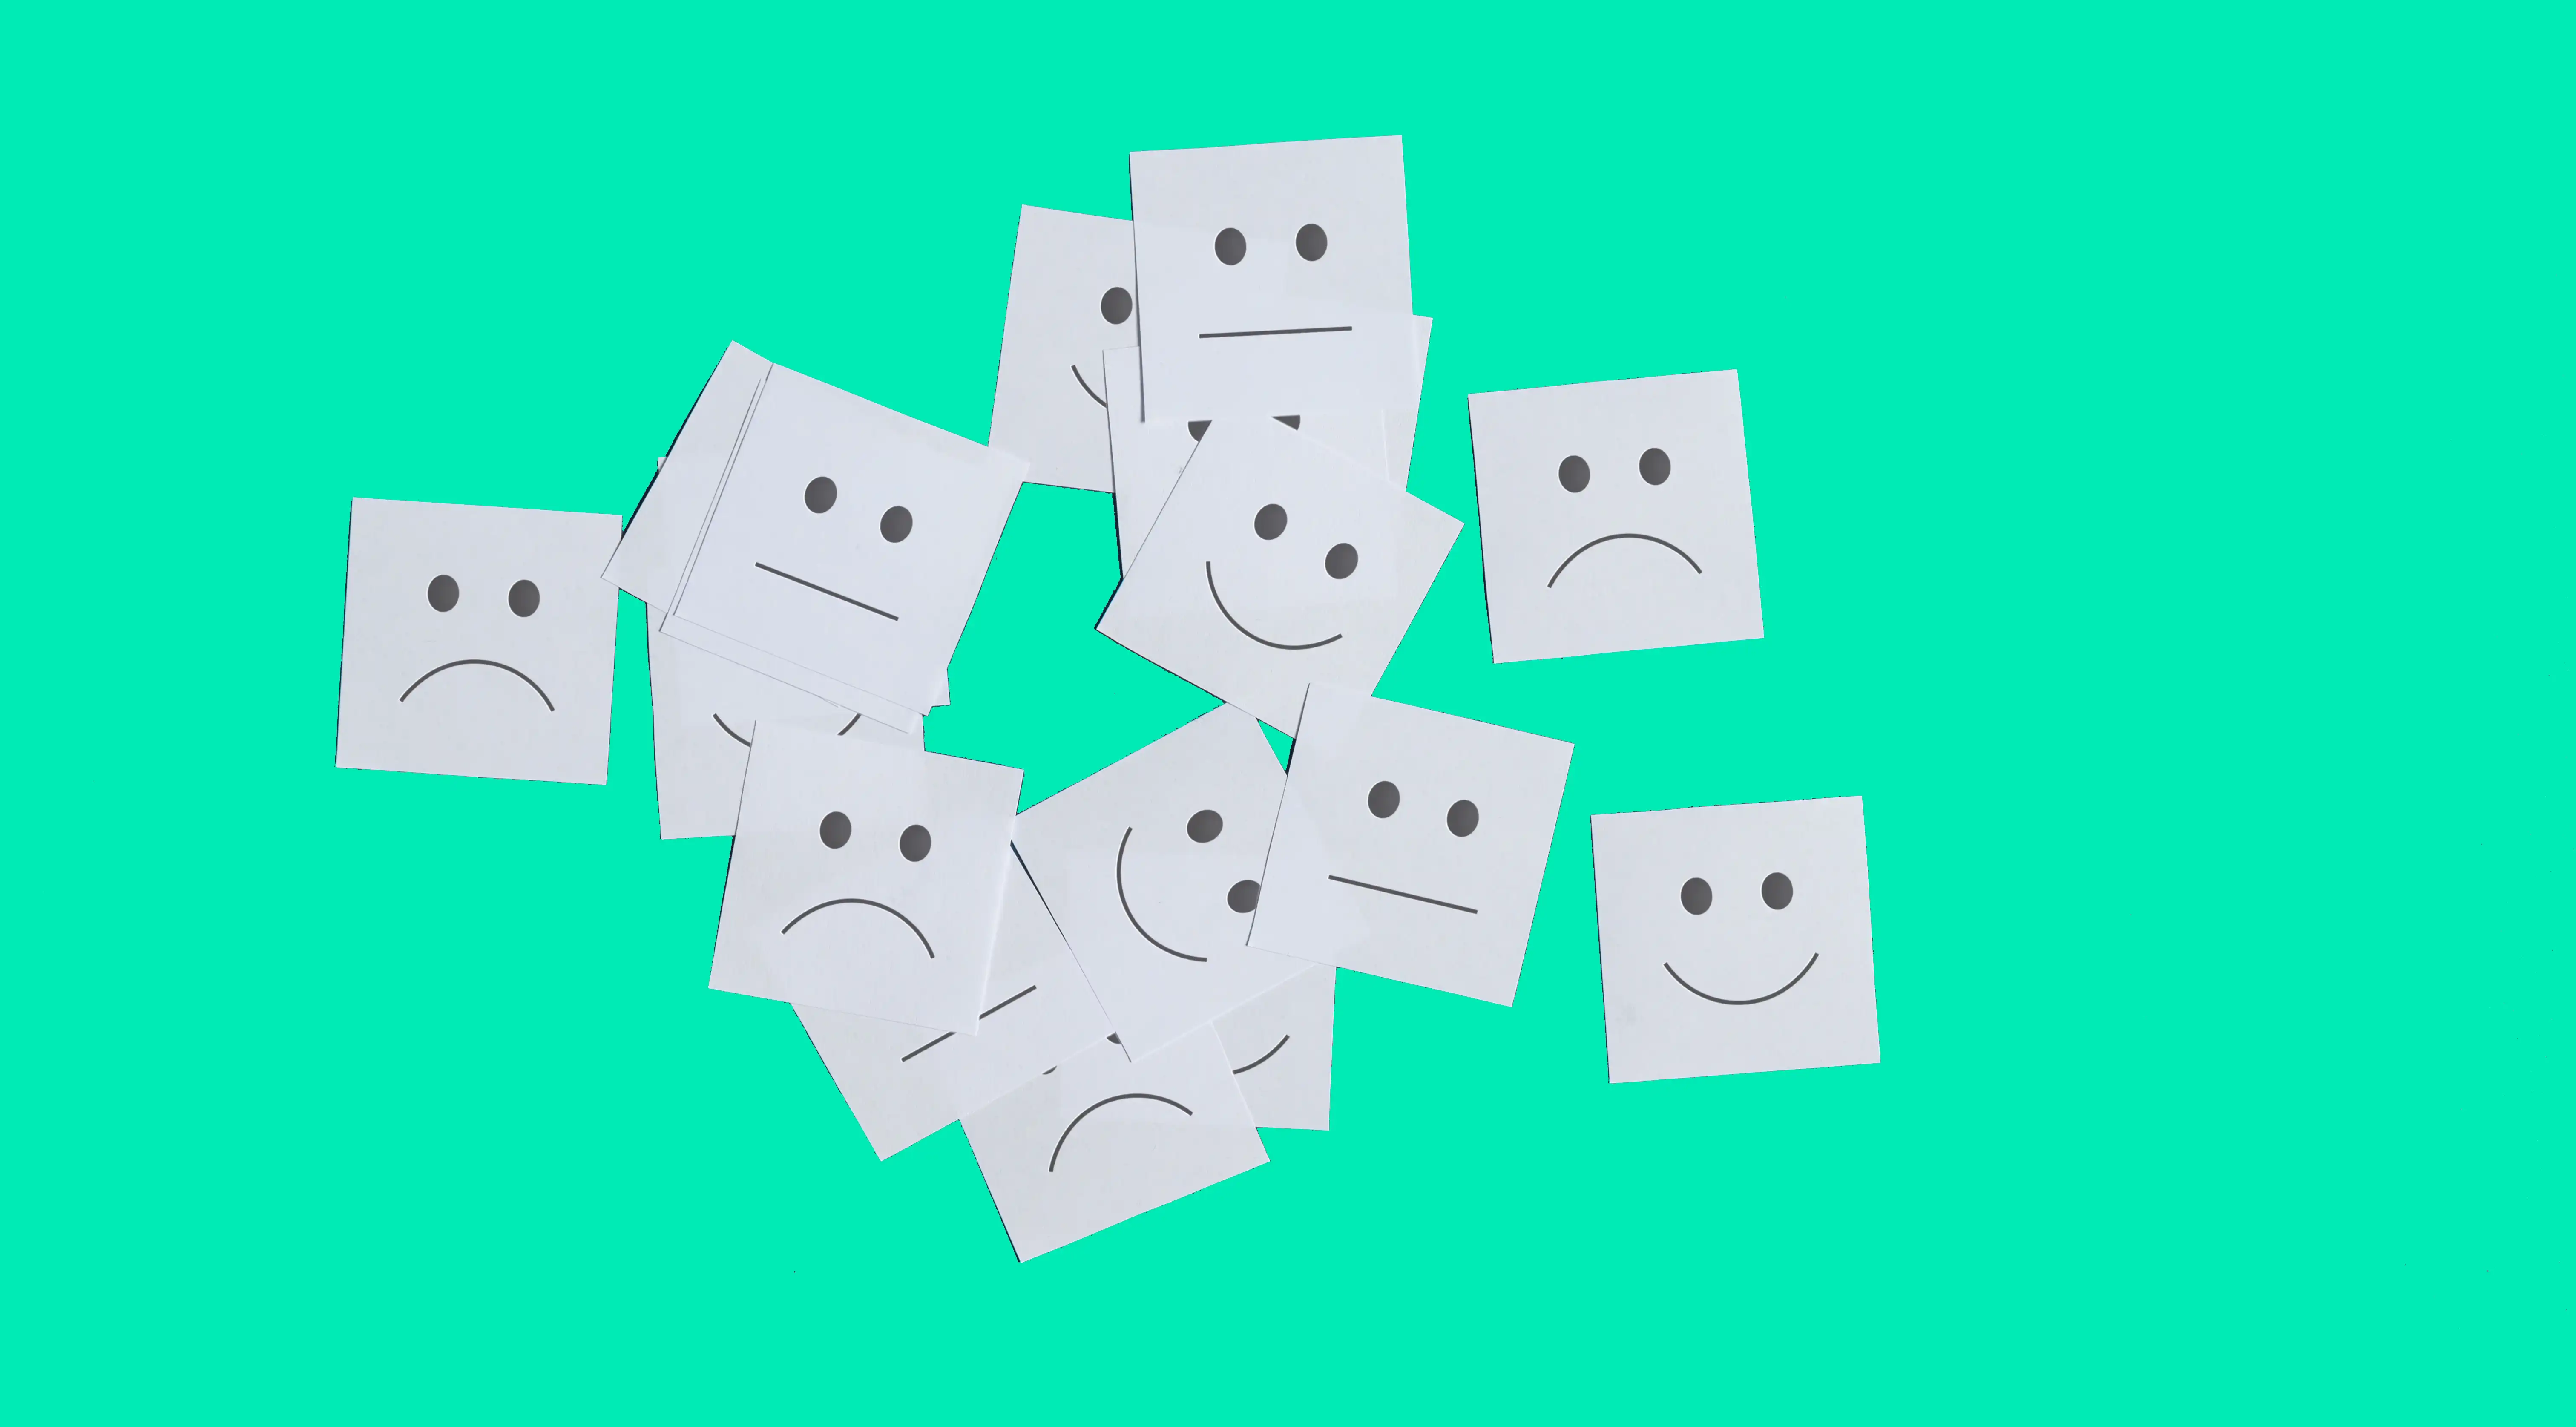 Smiley notes for collecting feedback